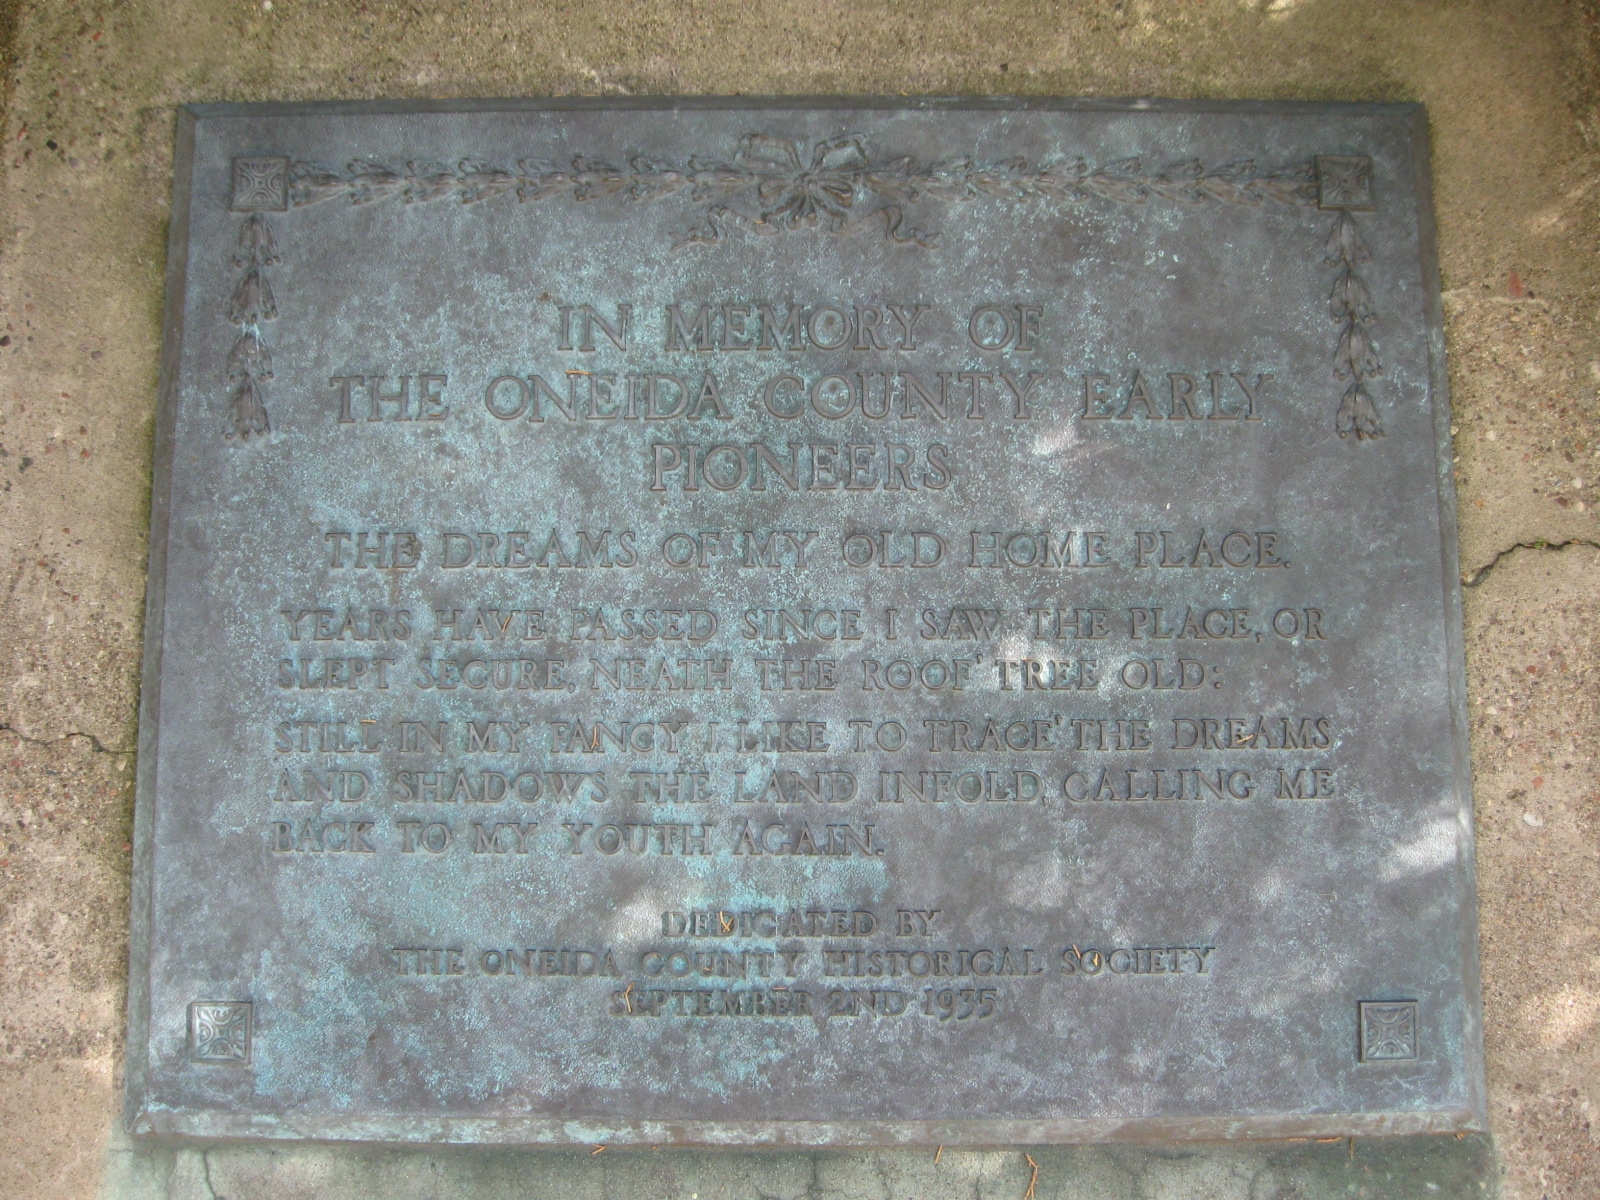 Nearby Plaque